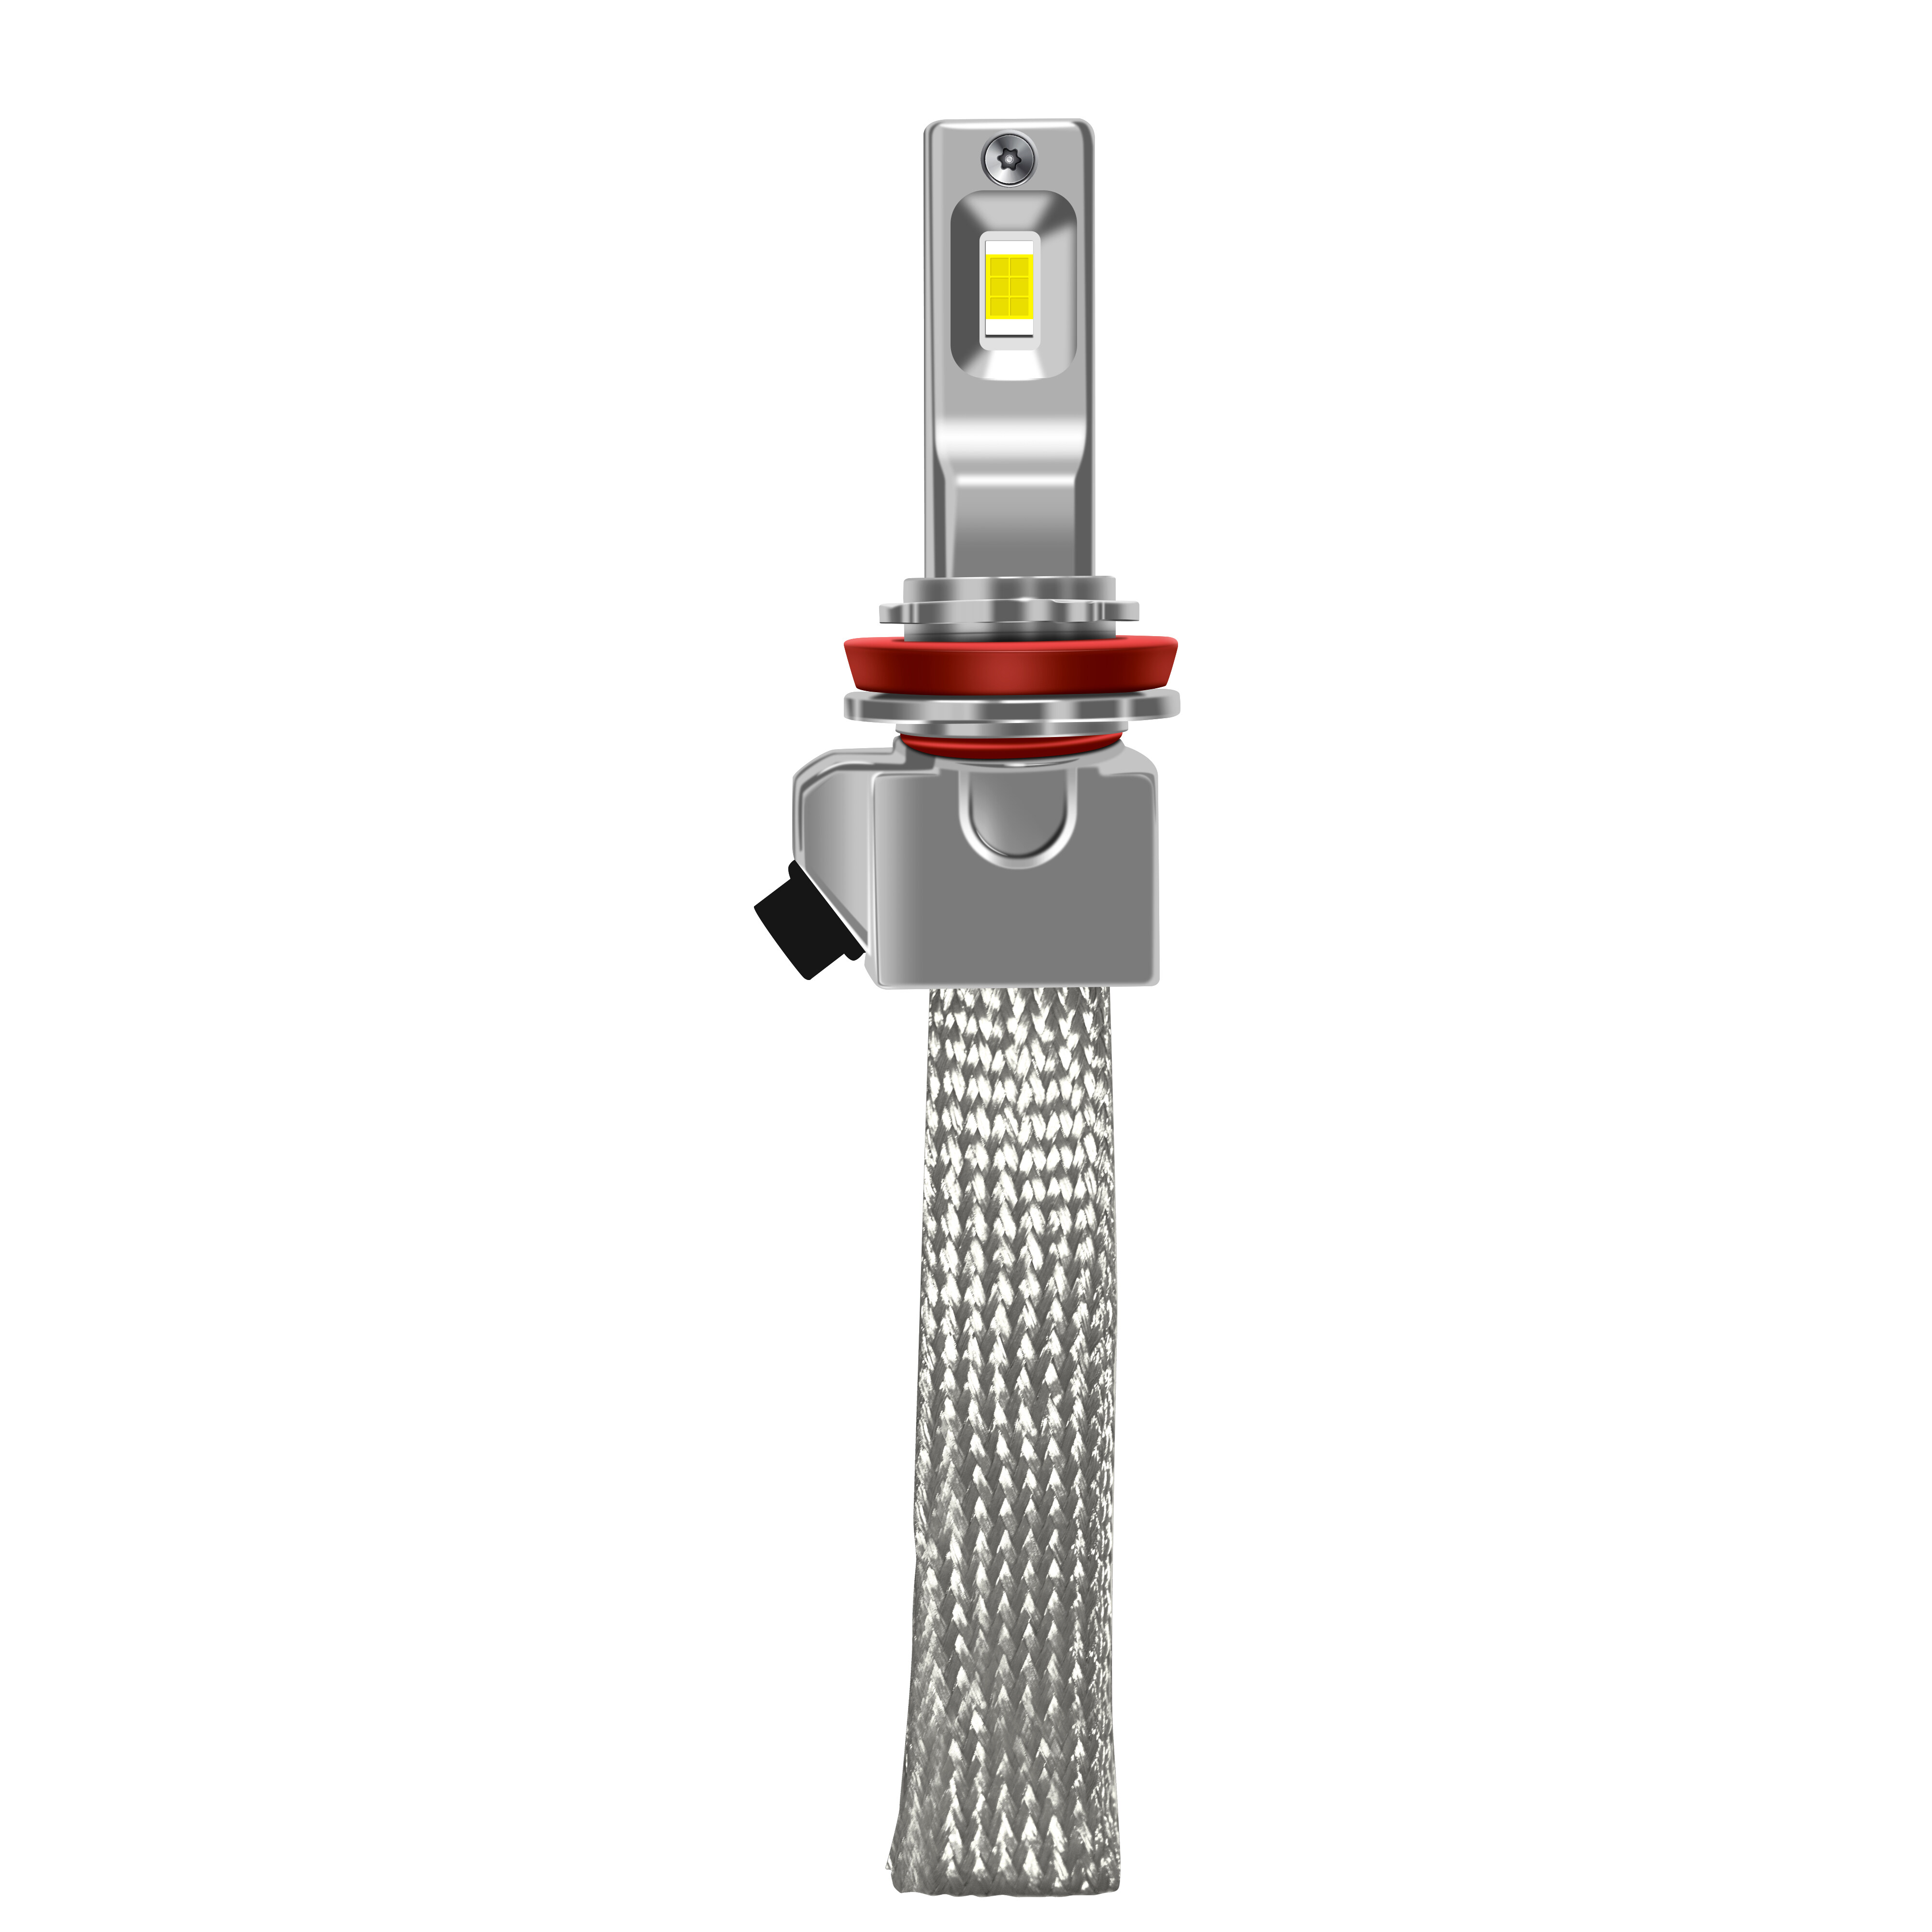 Auto LED Headlights and Auto Emergency Tools Supplier-conpex